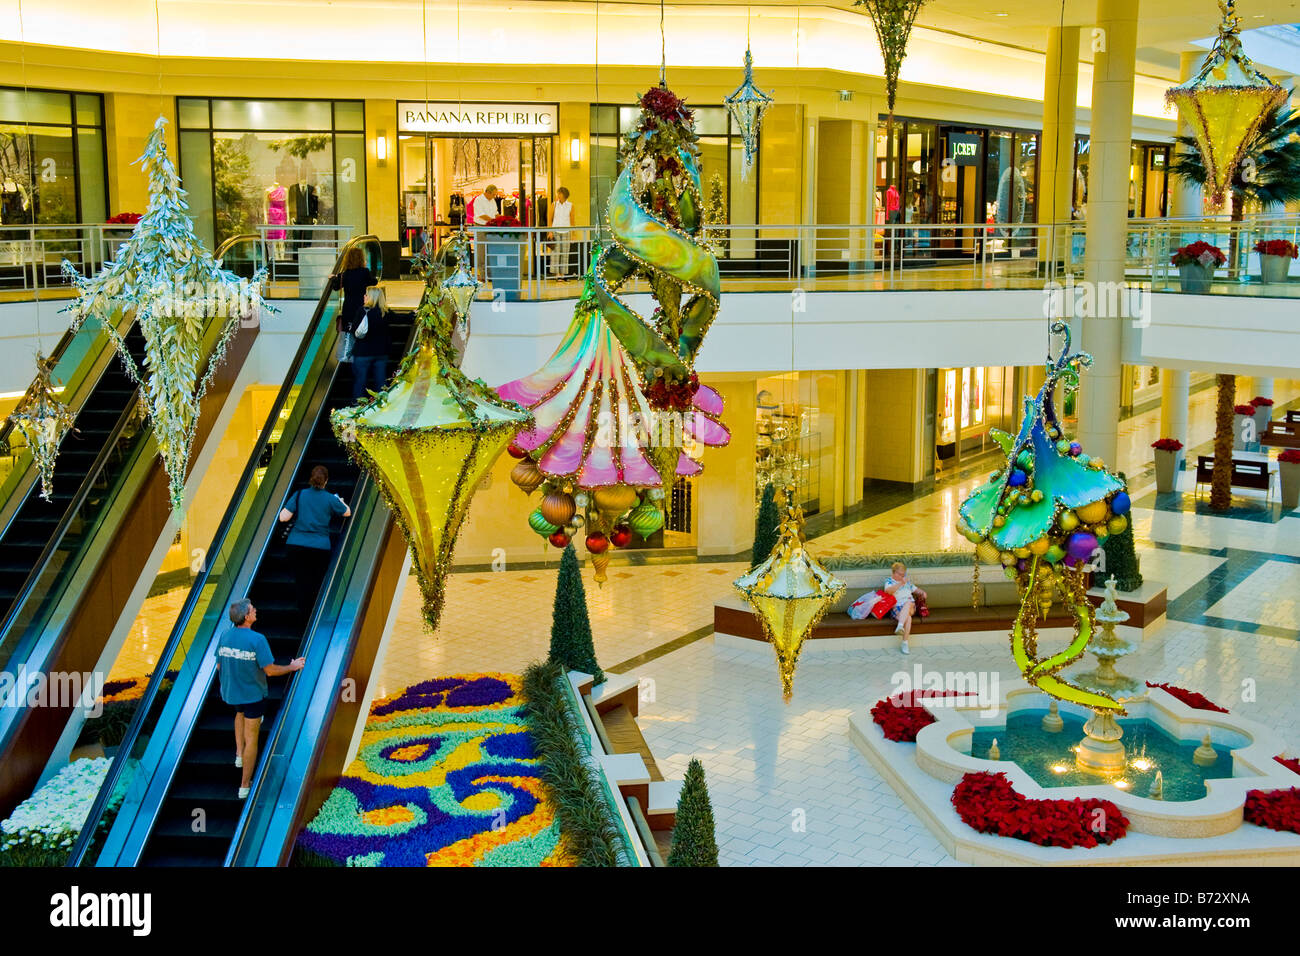 Gardens Shopping Mall or center Xmas decorations in central area by escalators , flower beds & fountains Stock Photo